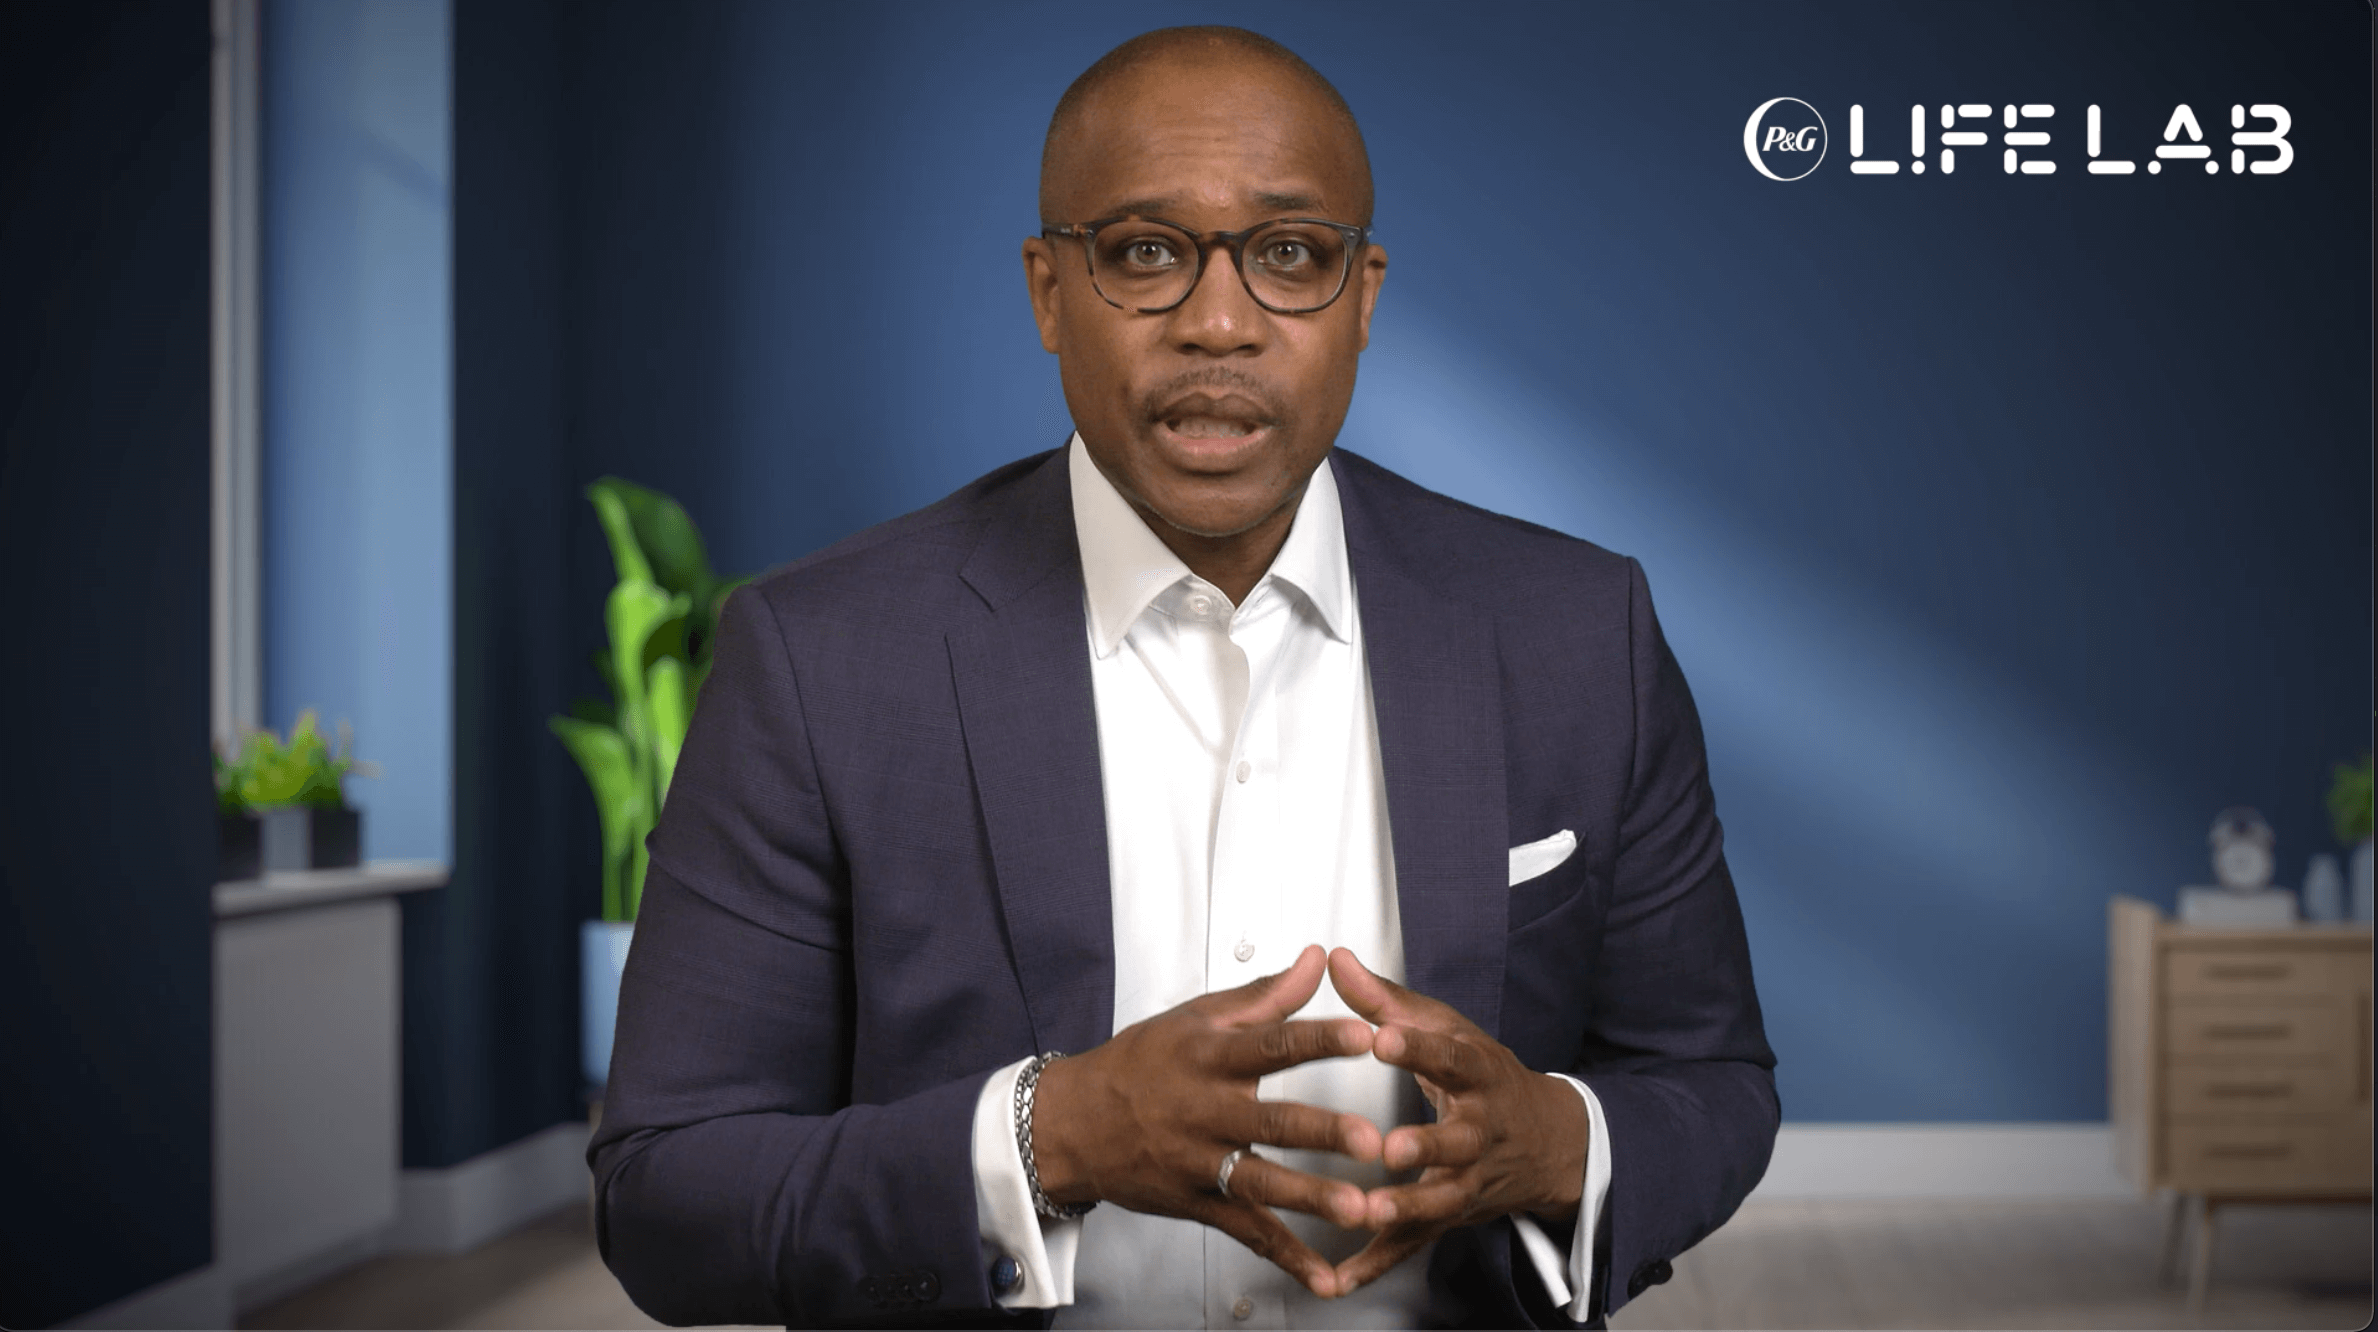 Damon Jones, Chief Communications Officer, discusses how our approach to innovation is founded in equality and inclusion.